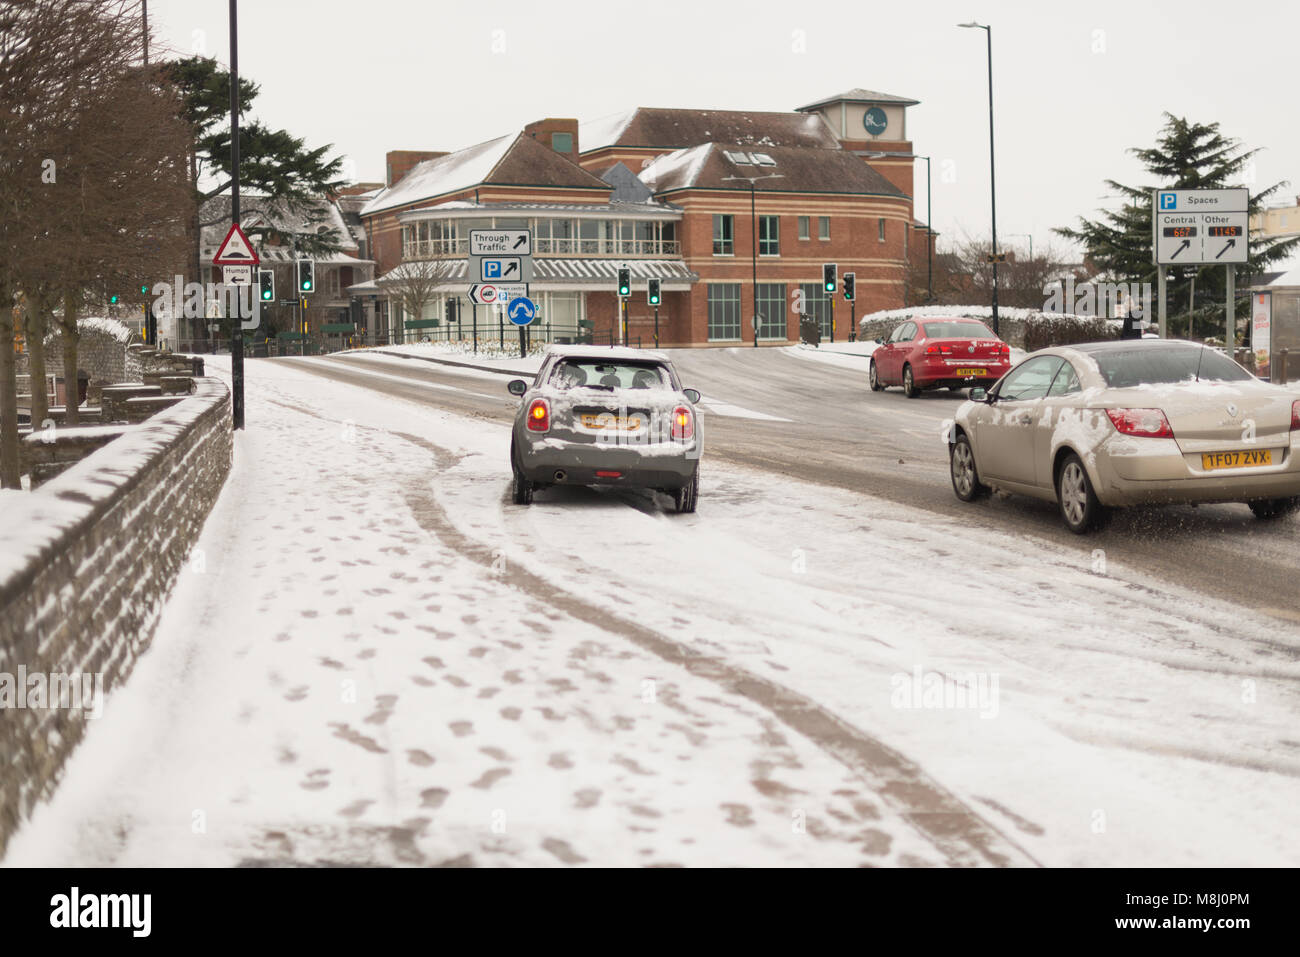 Stratford upon Avon England March 18th 2018 travel chaos with cars skidding  on icy road s after Beast from The East blizzard conditions Credit: paul  rushton/Alamy Live News Stock Photo - Alamy